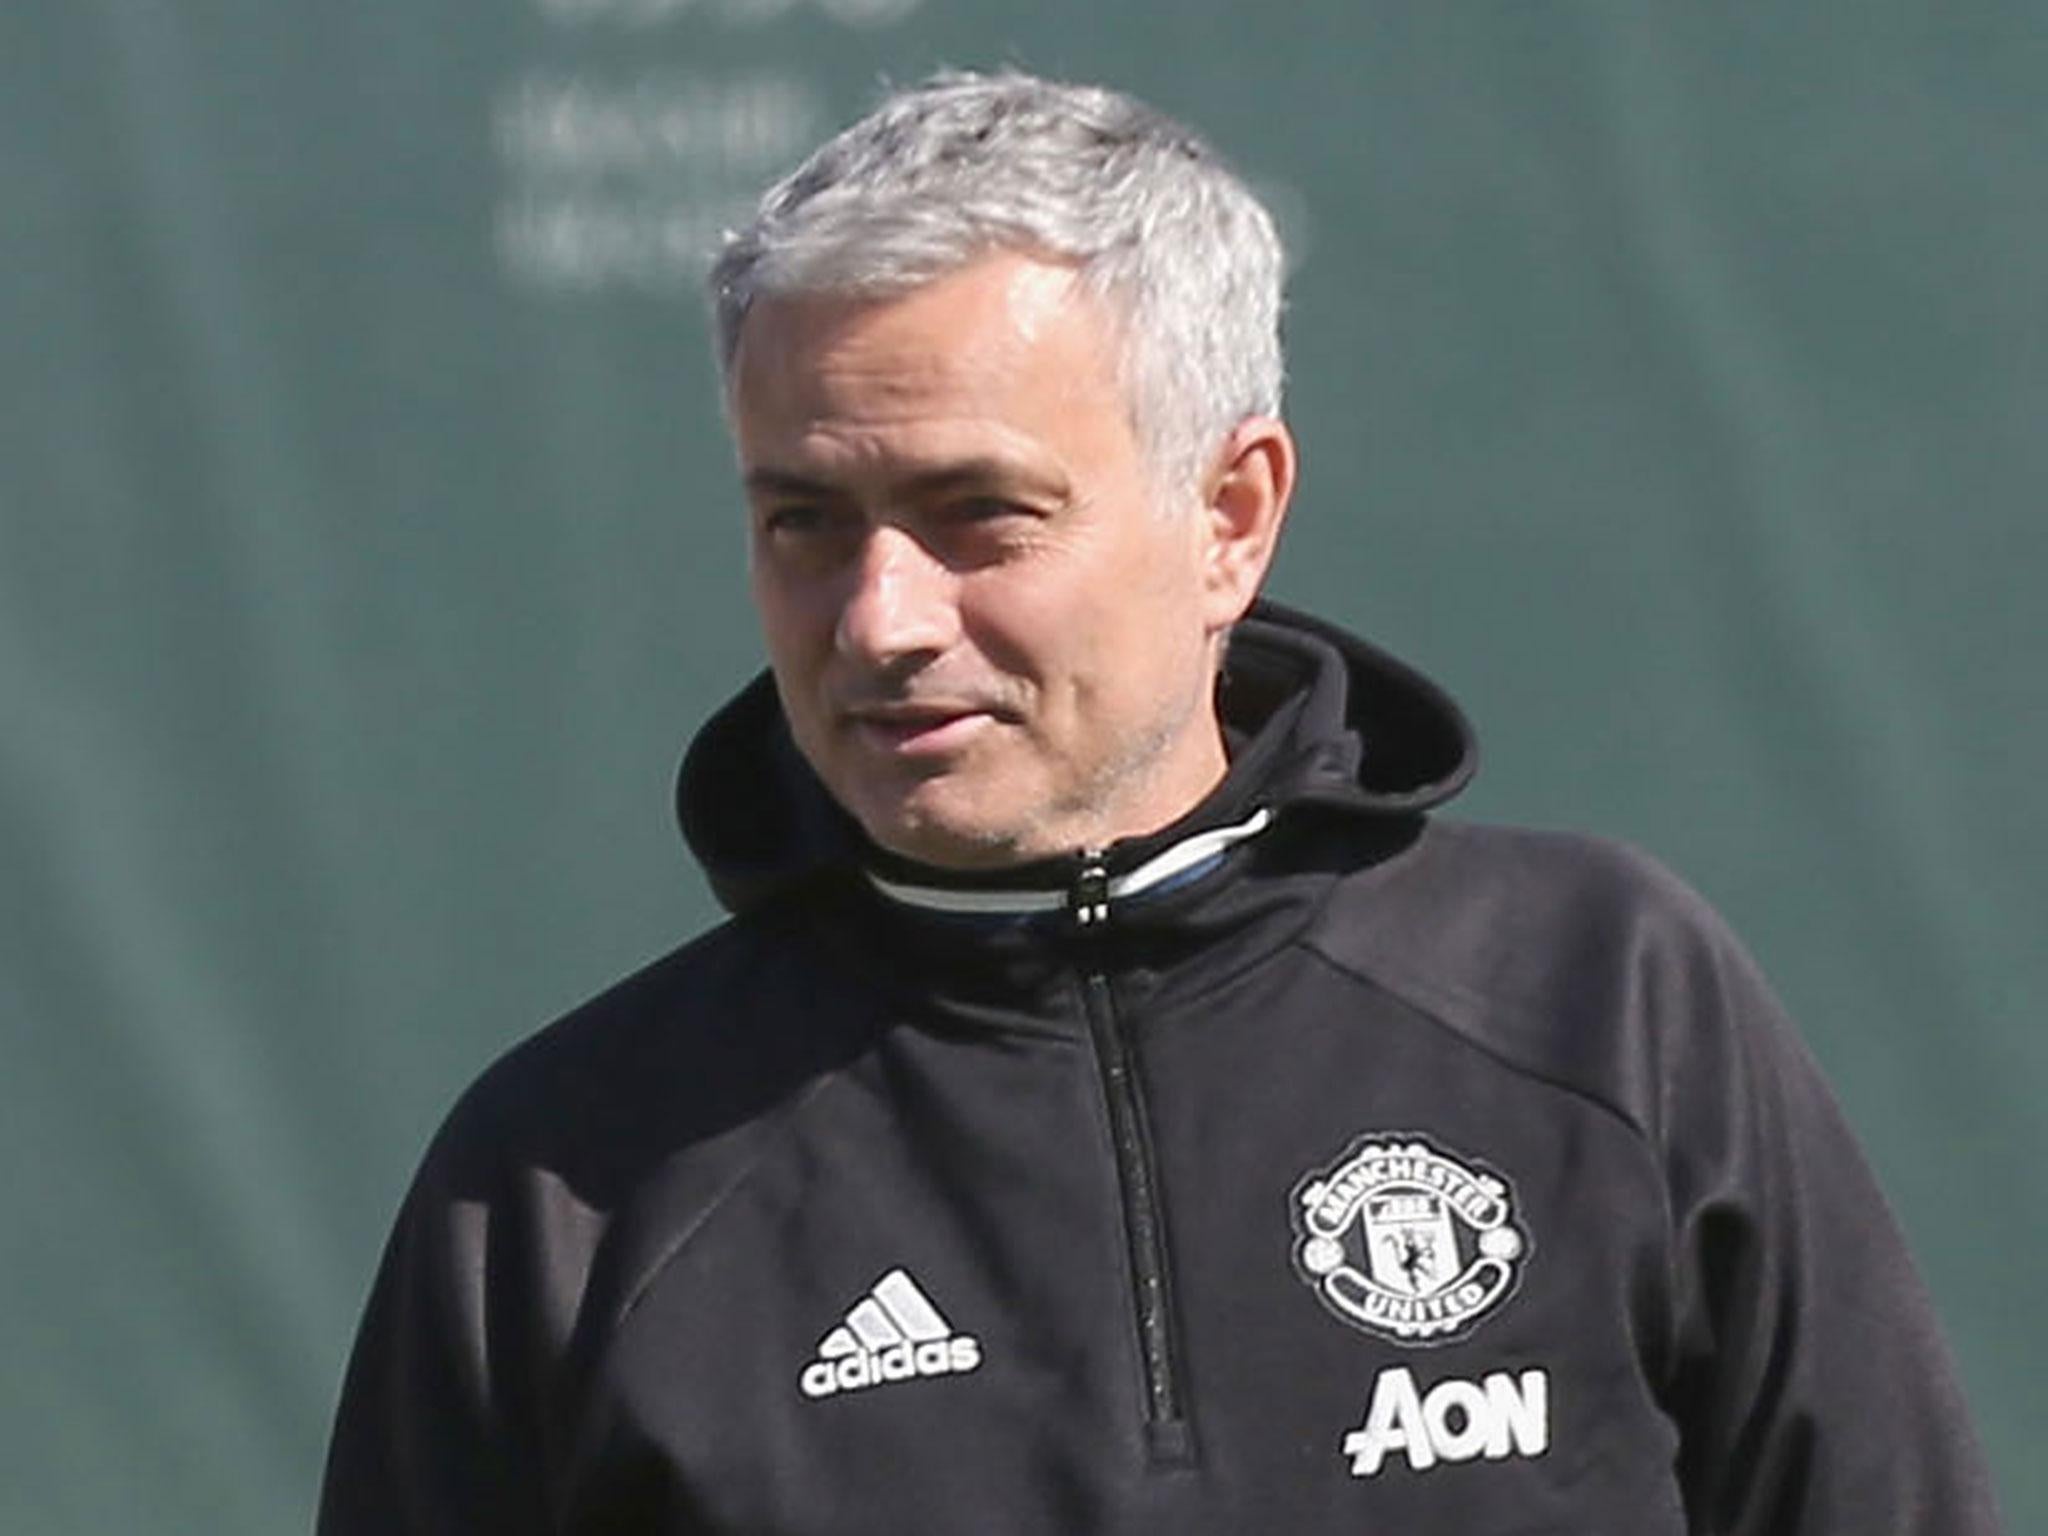 Jose Mourinho believes he's on to something good with Manchester United